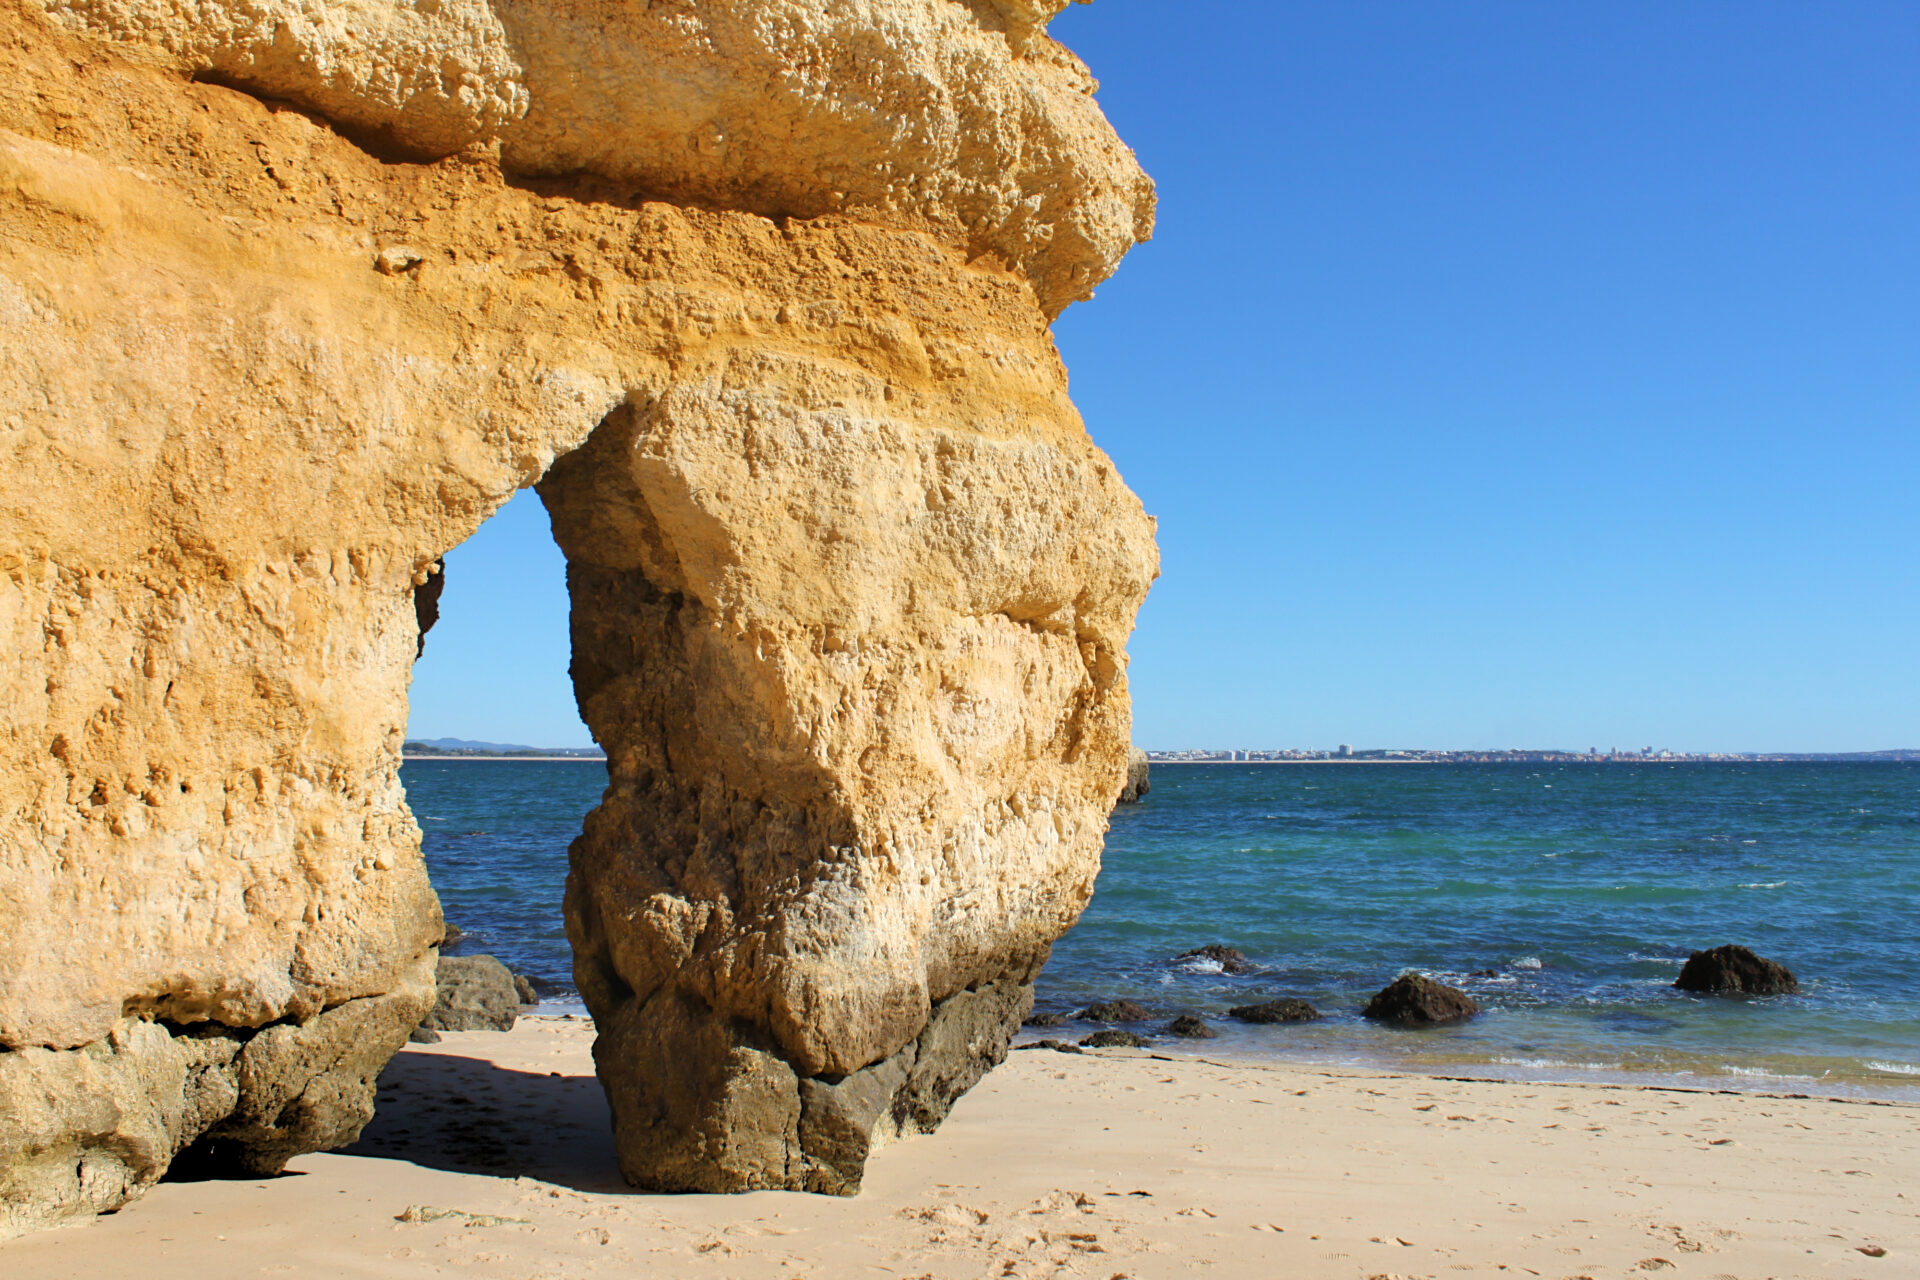 Lagos, Portugal and Why Should You Go to the Portuguese Coast